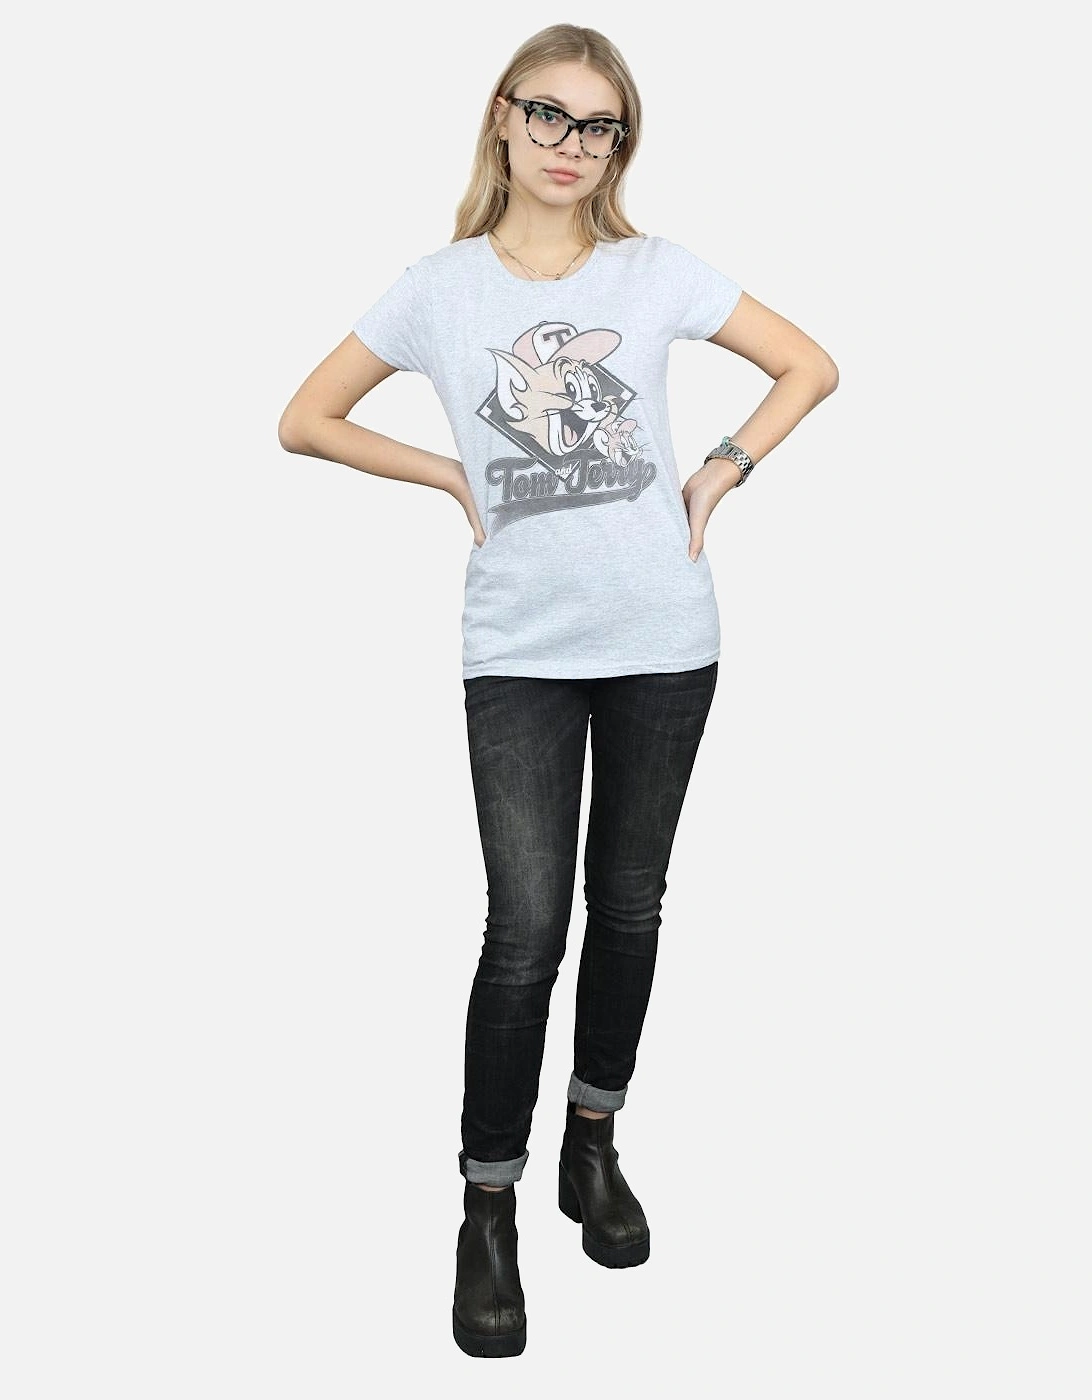 Tom And Jerry Womens/Ladies Baseball Caps Cotton T-Shirt